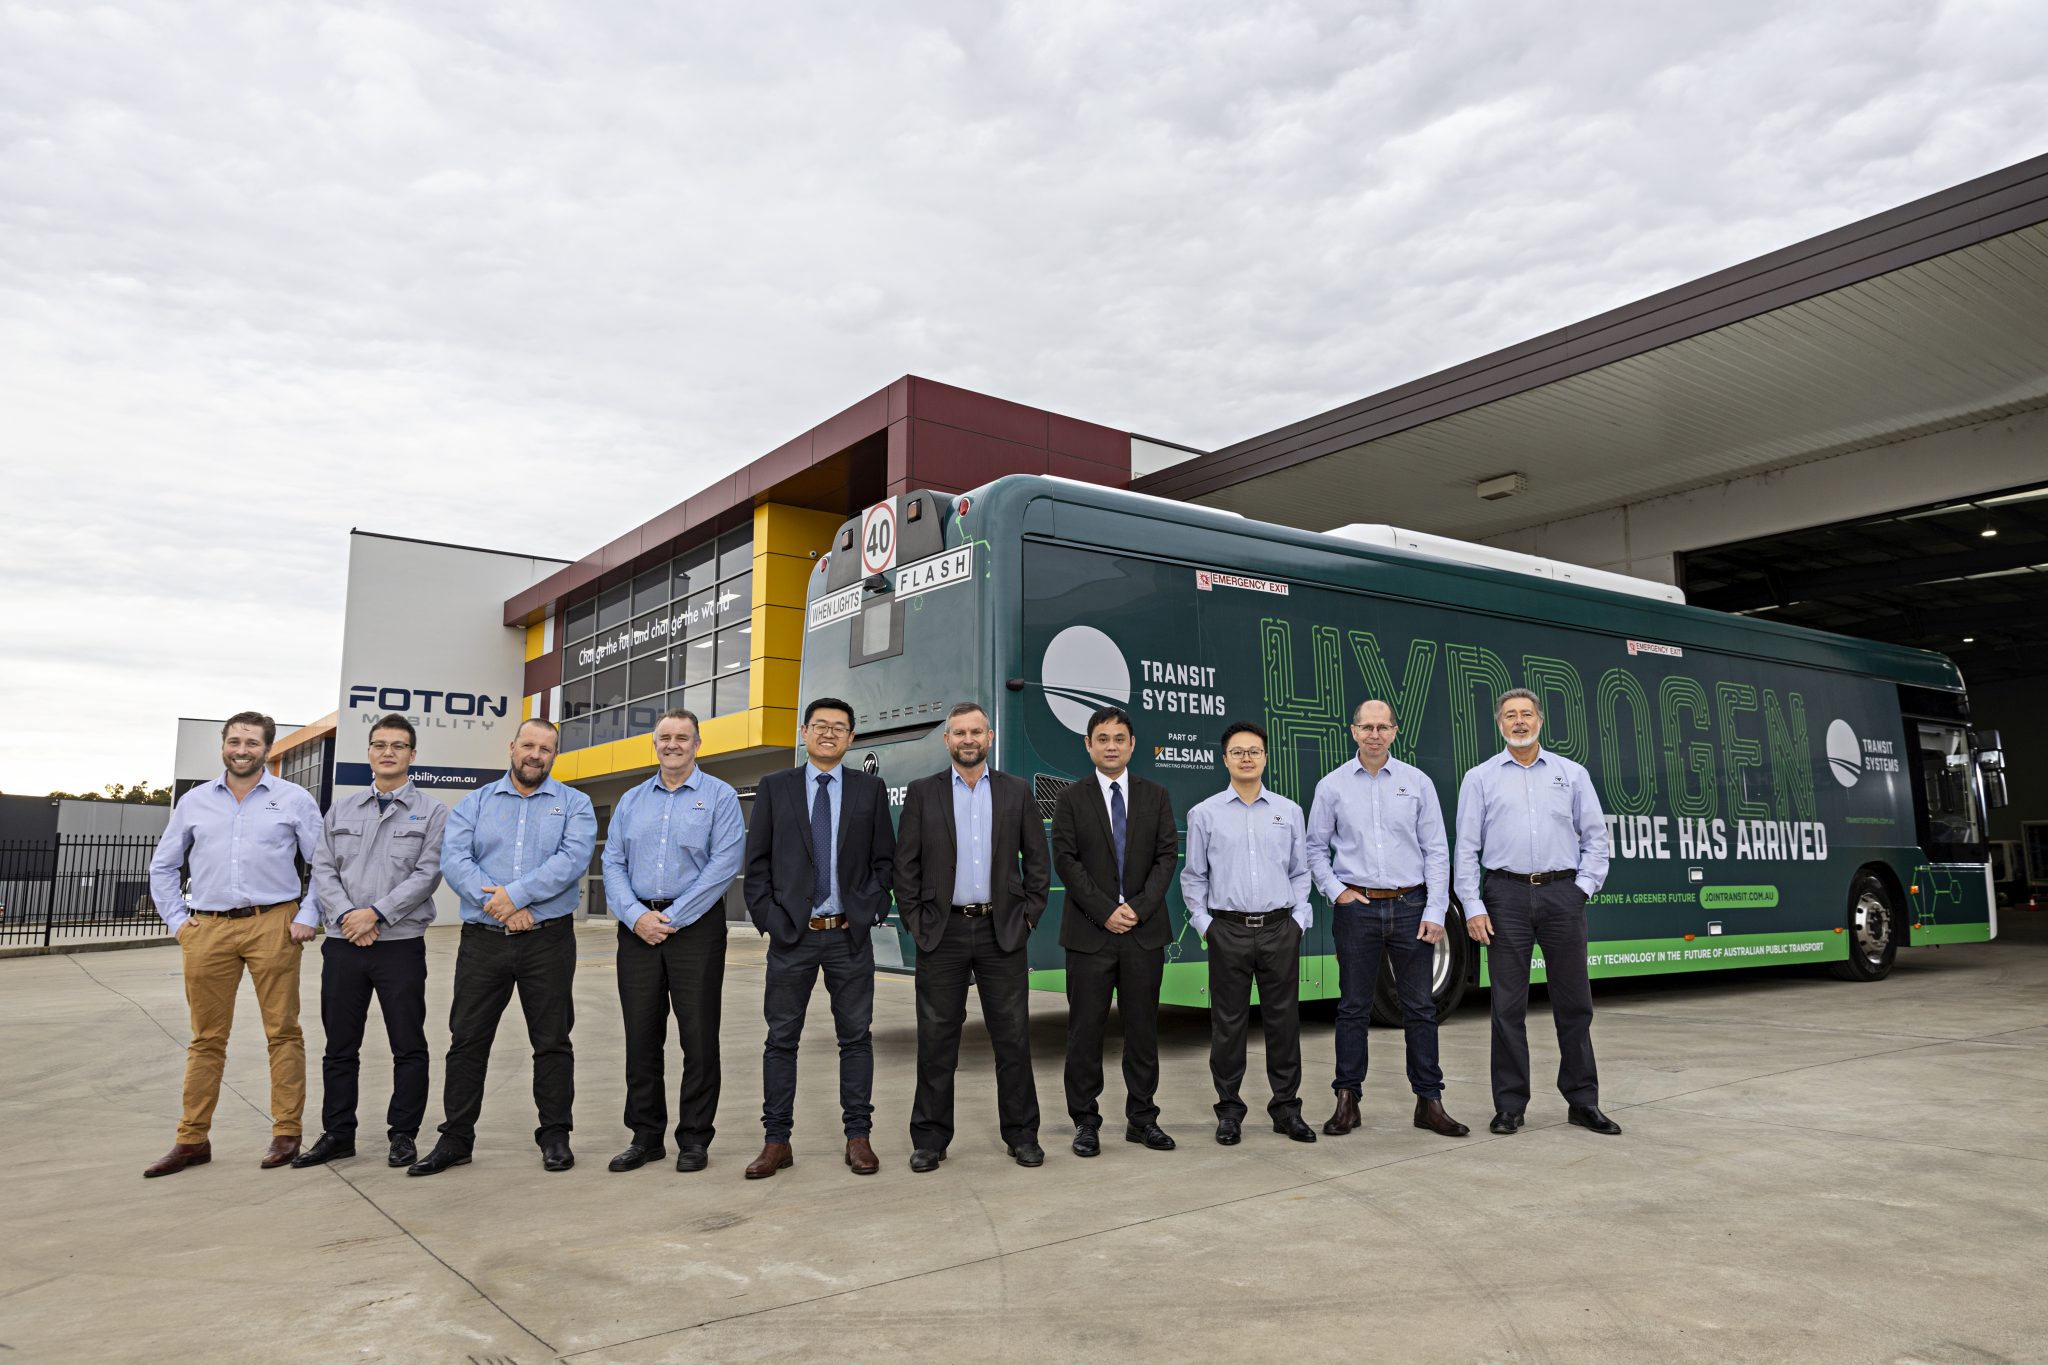 Australian first: Foton Mobility Hydrogen City buses arrive for Transit Systems Australia
